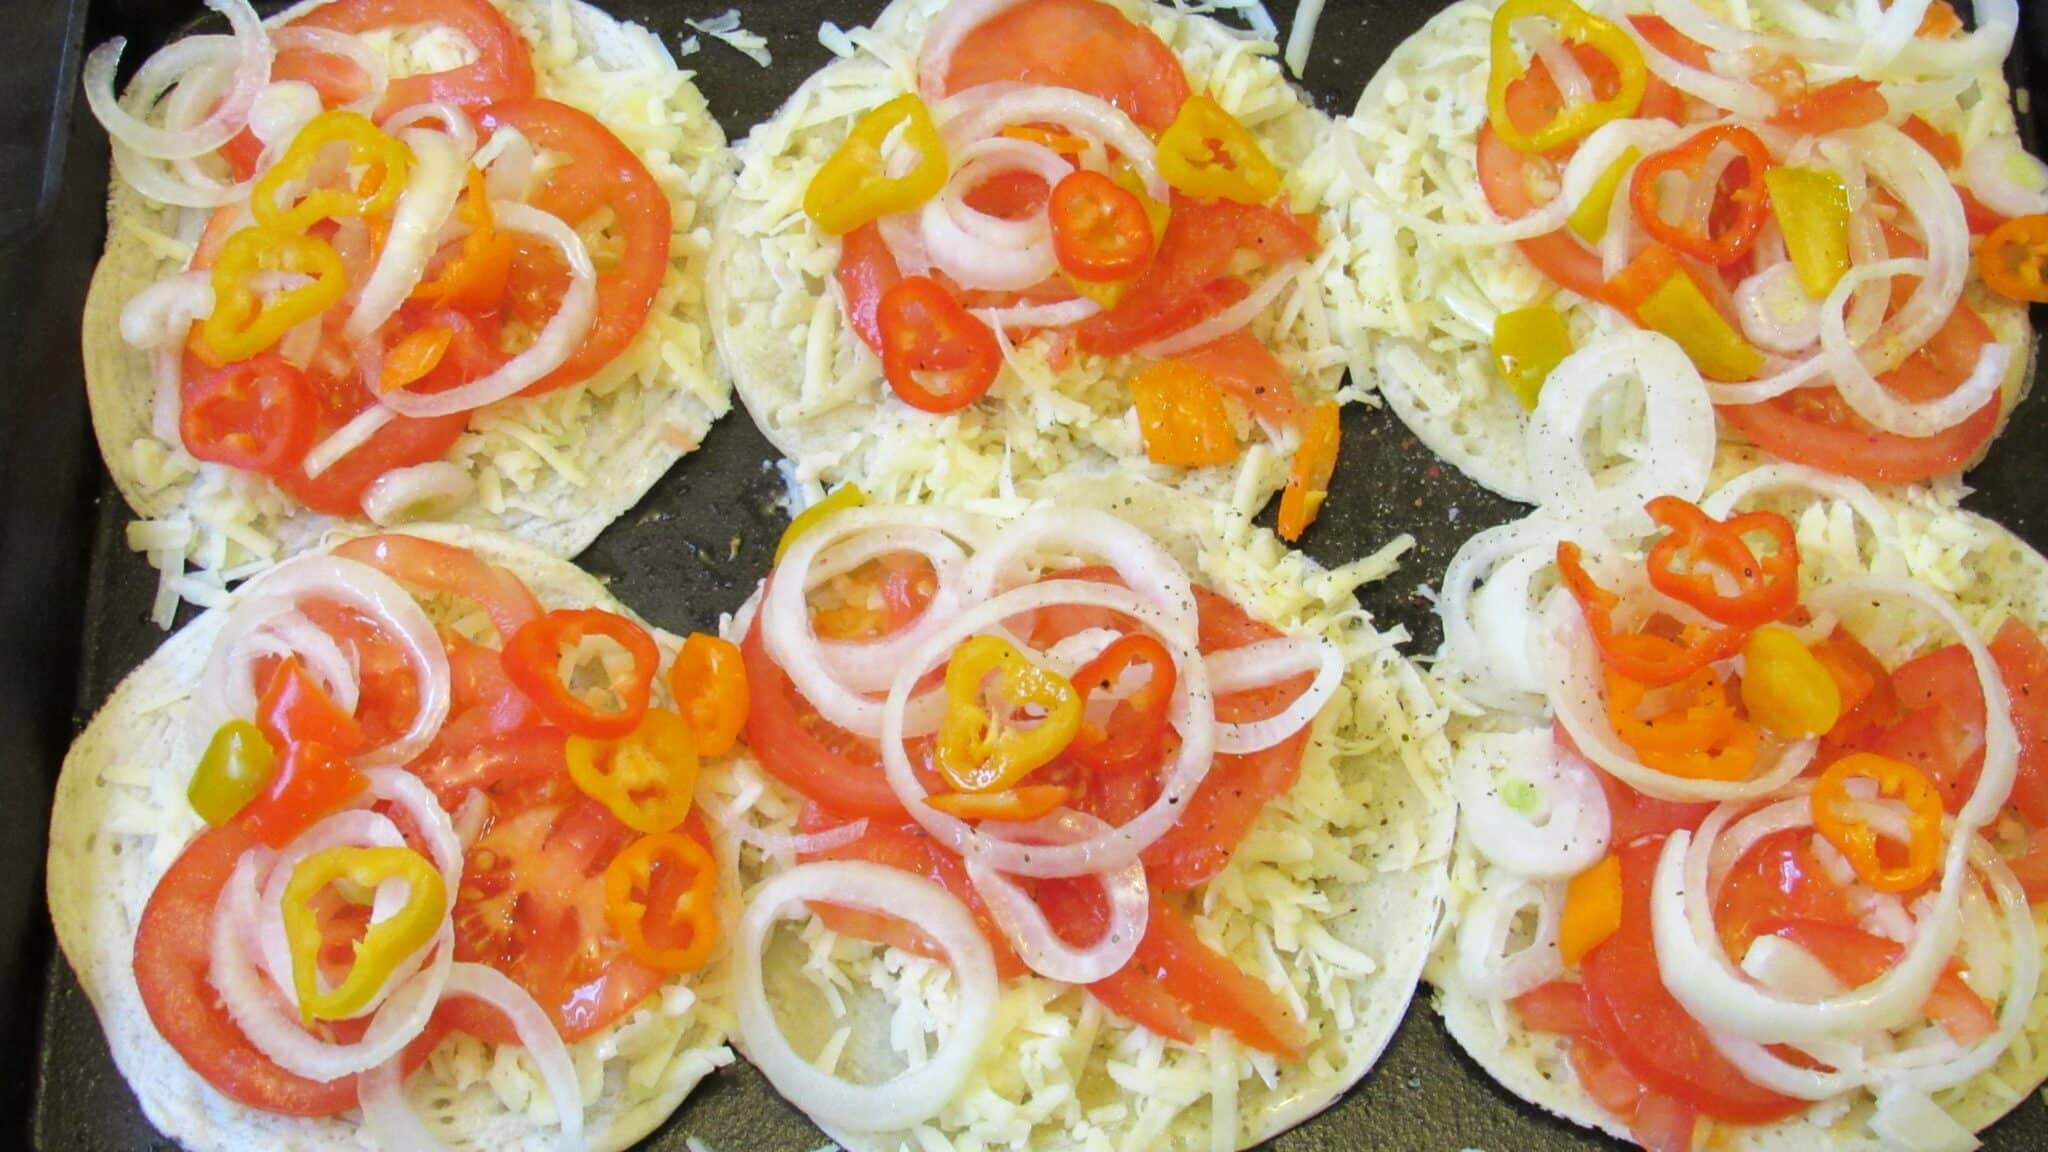 layer of onions and mini sweet peppers on top of tomatoes.